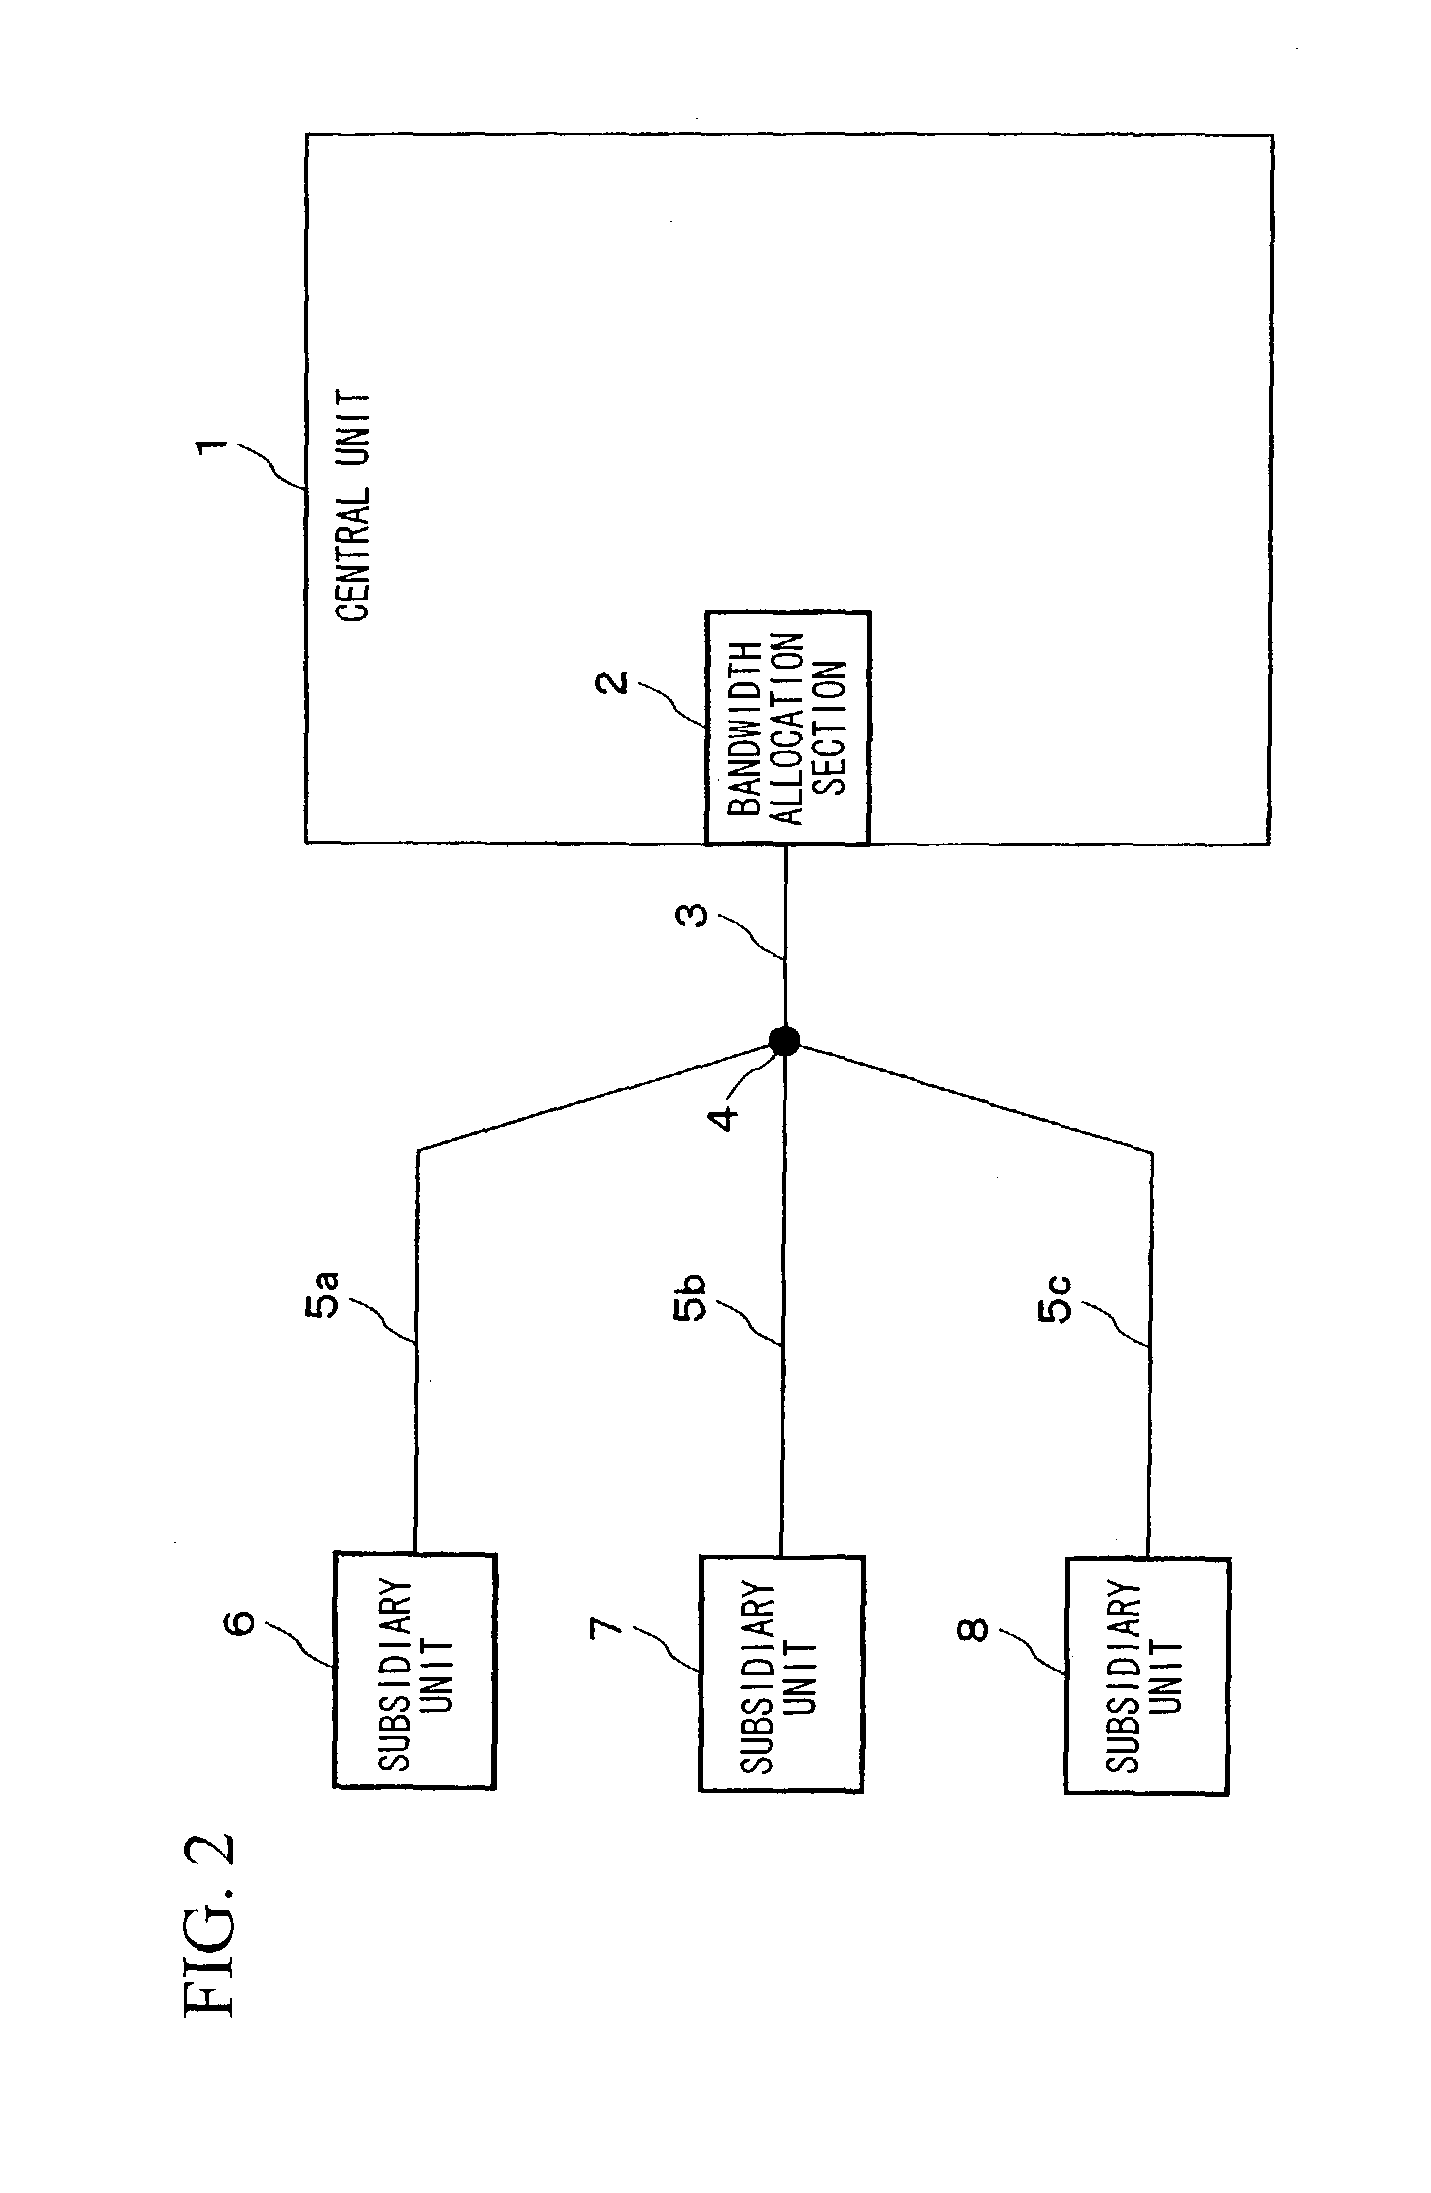 Bandwidth allocation method in point-to-multipoint communication system